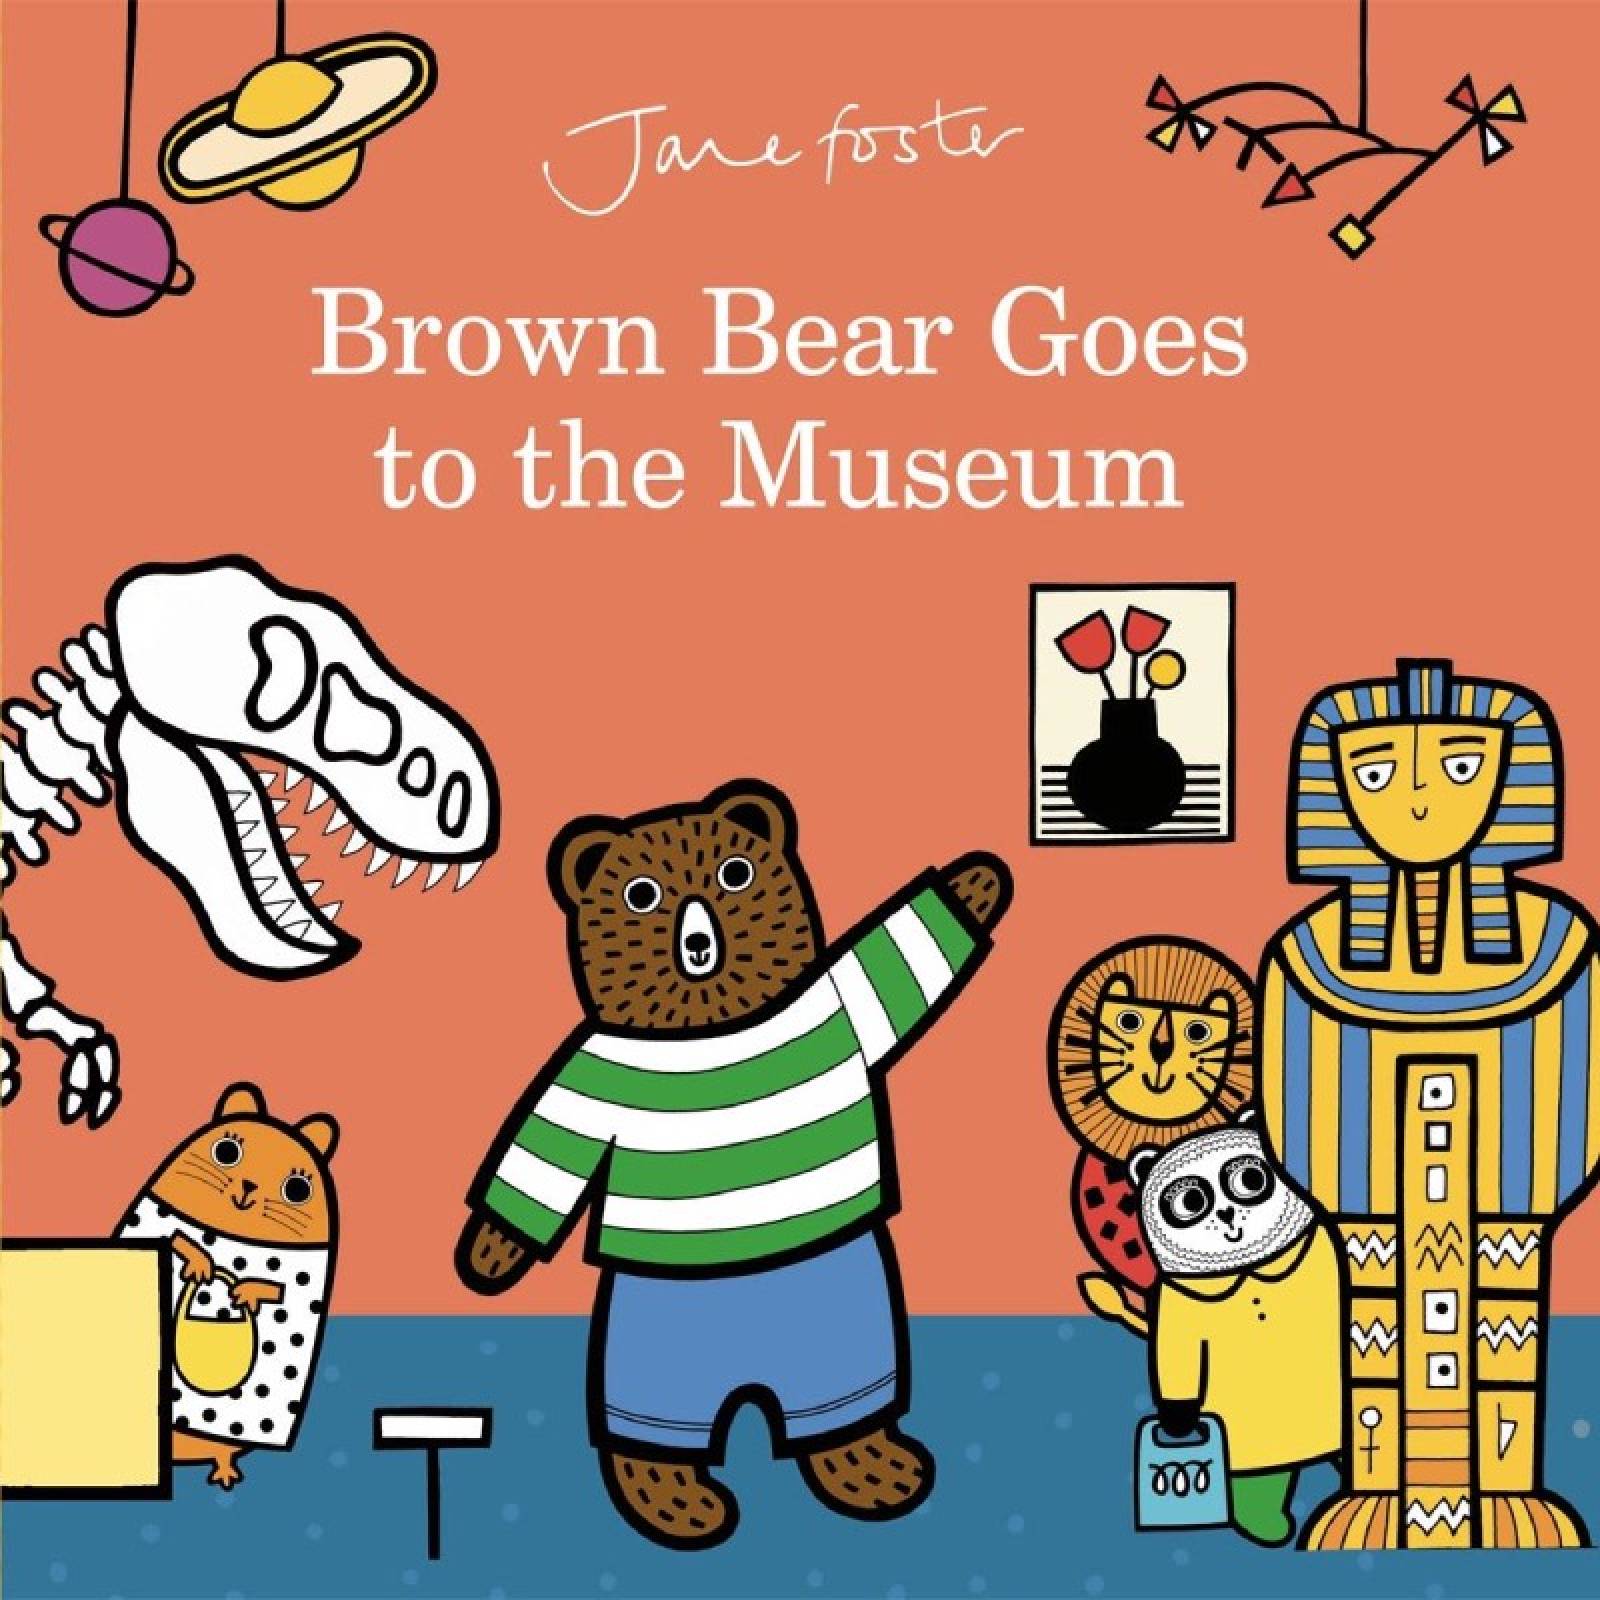 Brown Bear Goes To The Museum By Jane Foster - Board Book